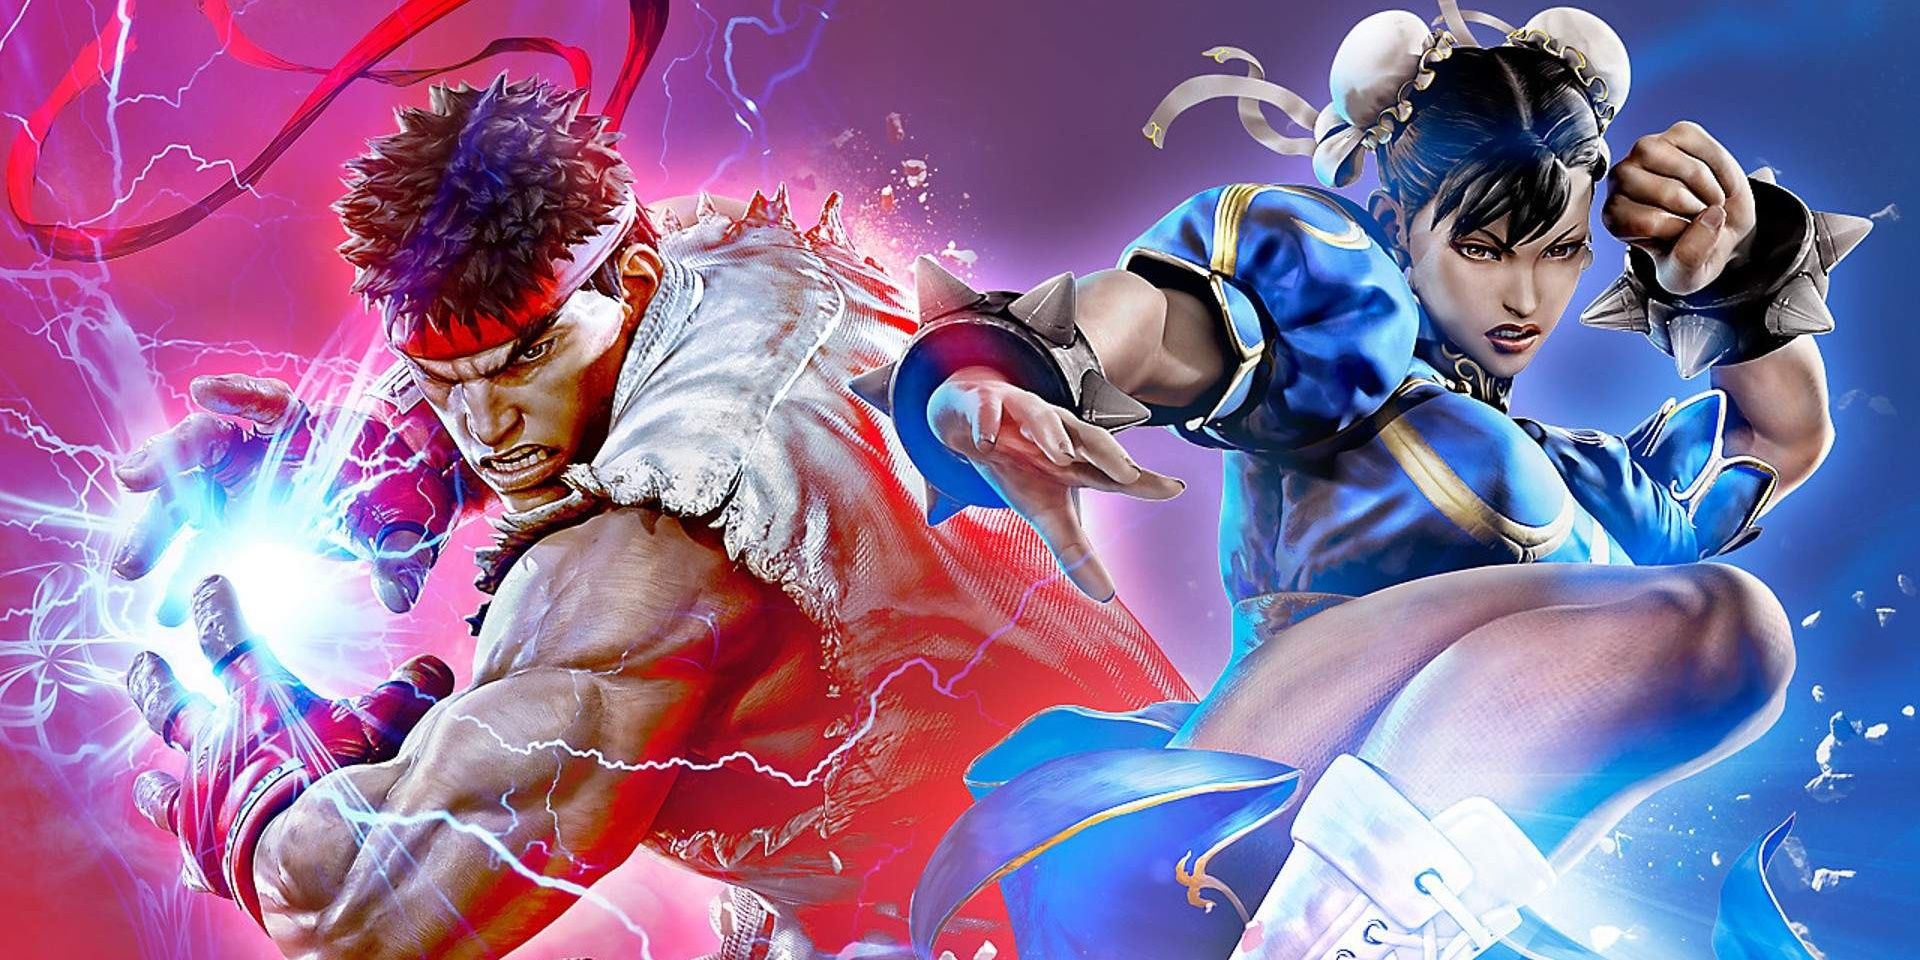 Ryu And Chun-Li Preparing Their Signature Moves In Street Fighter V